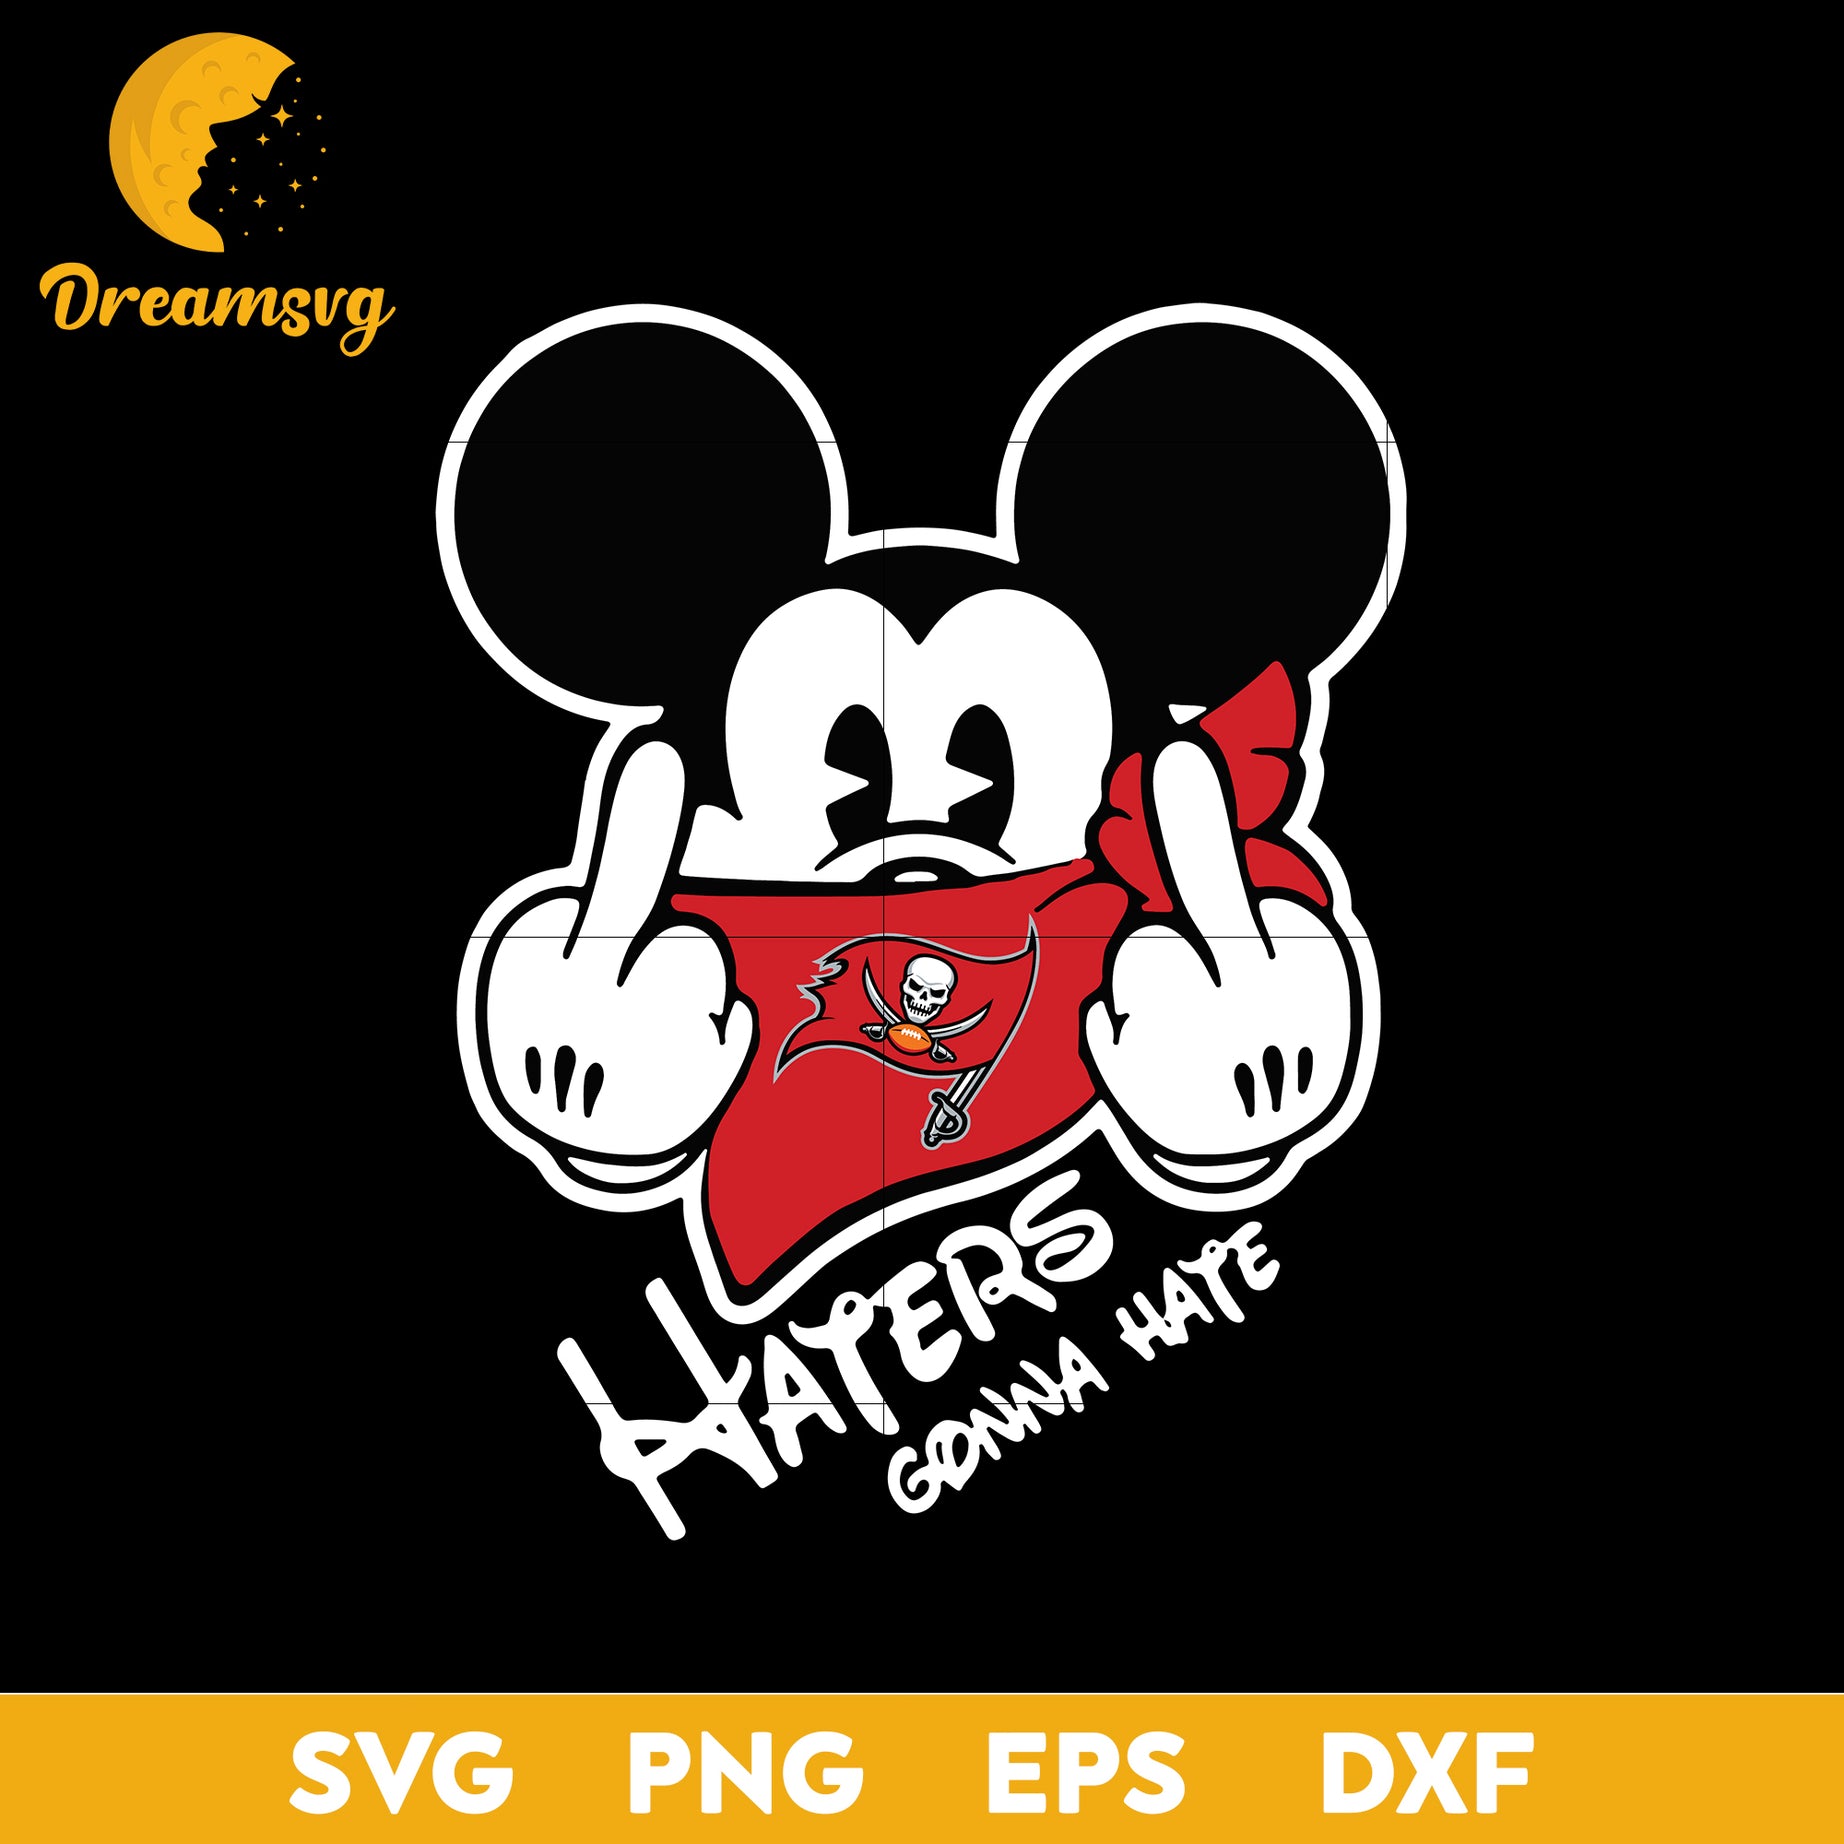 Tampa Bay Buccaneers, Mickey, Haters Gonna Hate Svg, Nfl Svg, Png, Dxf, Eps Digital File.